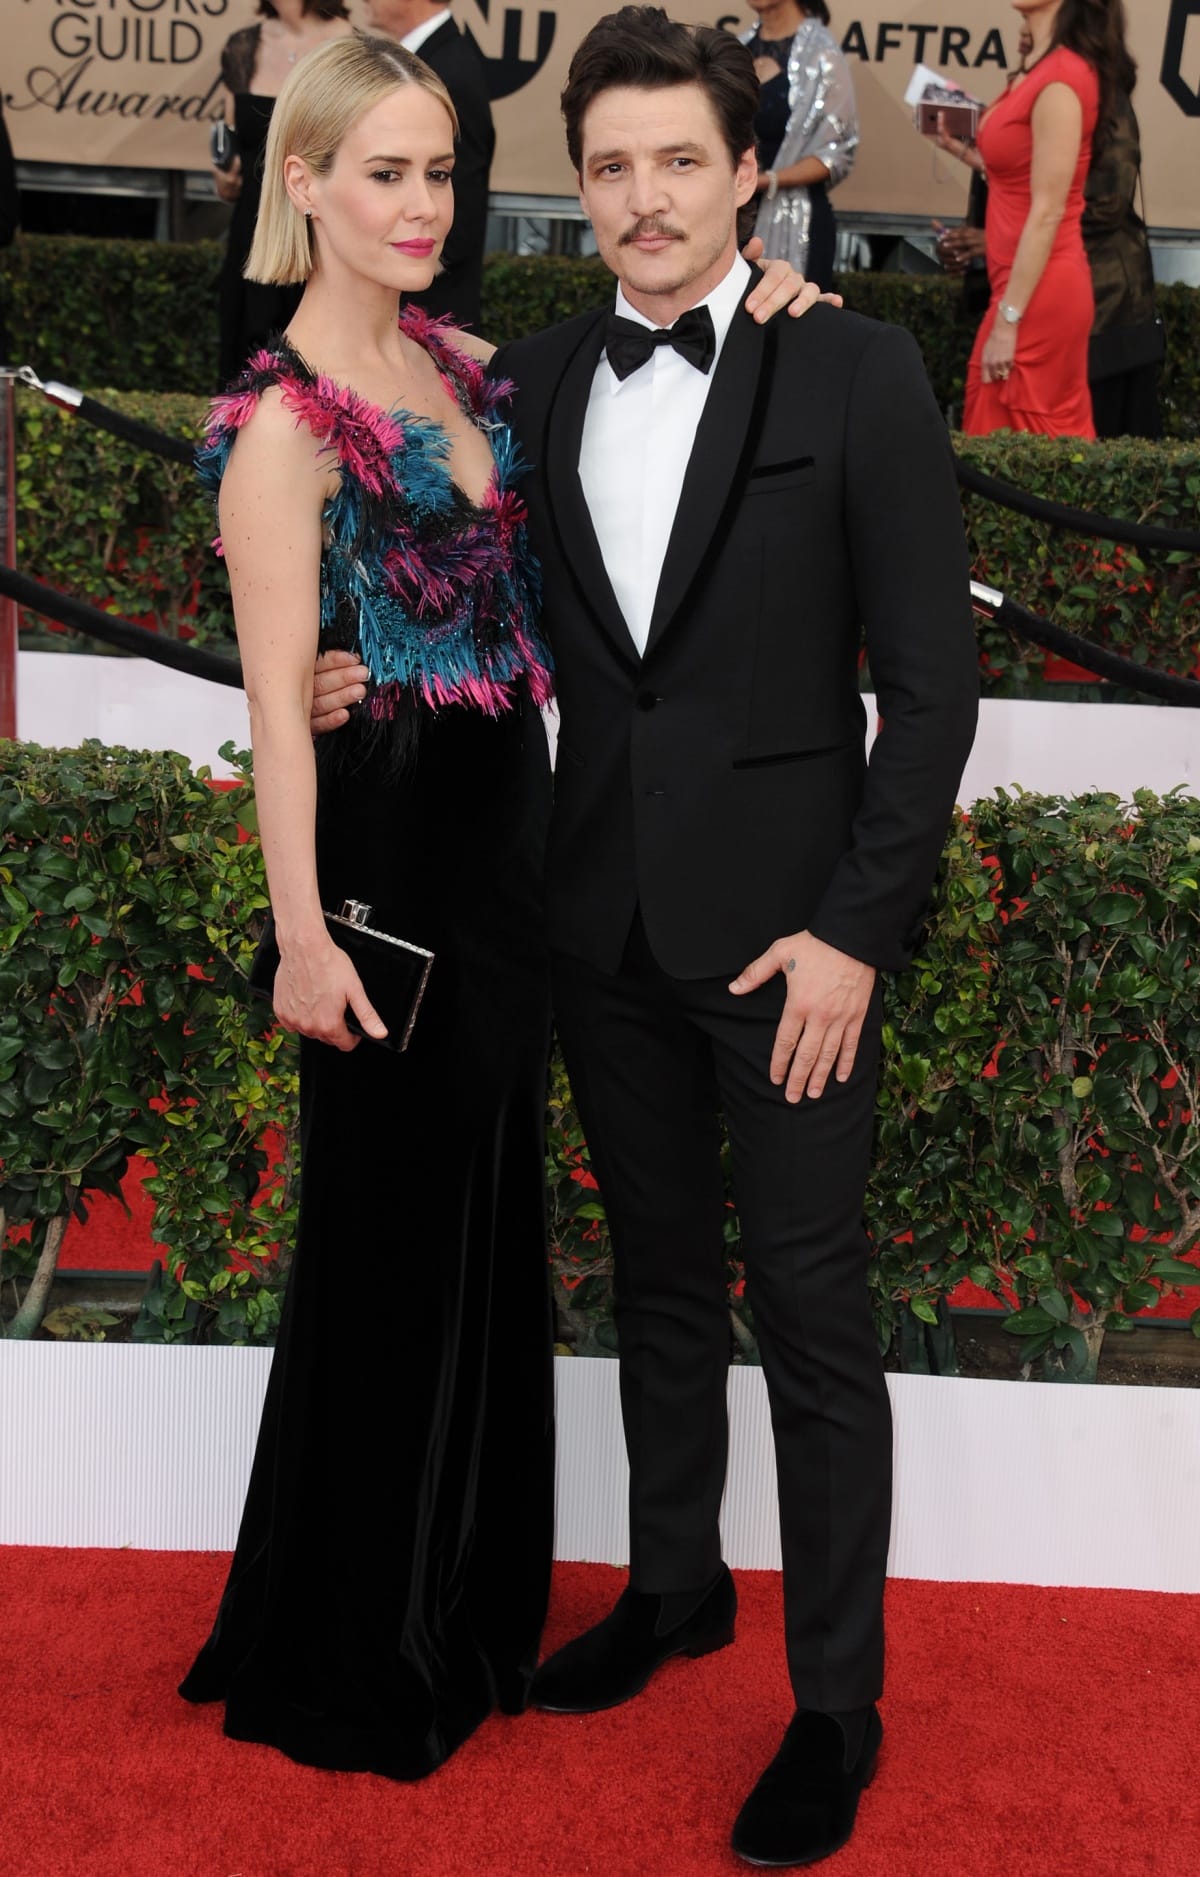 Sarah Paulson and Pedro Pascal looked stunning together at the 22nd Annual Screen Actors Guild Awards